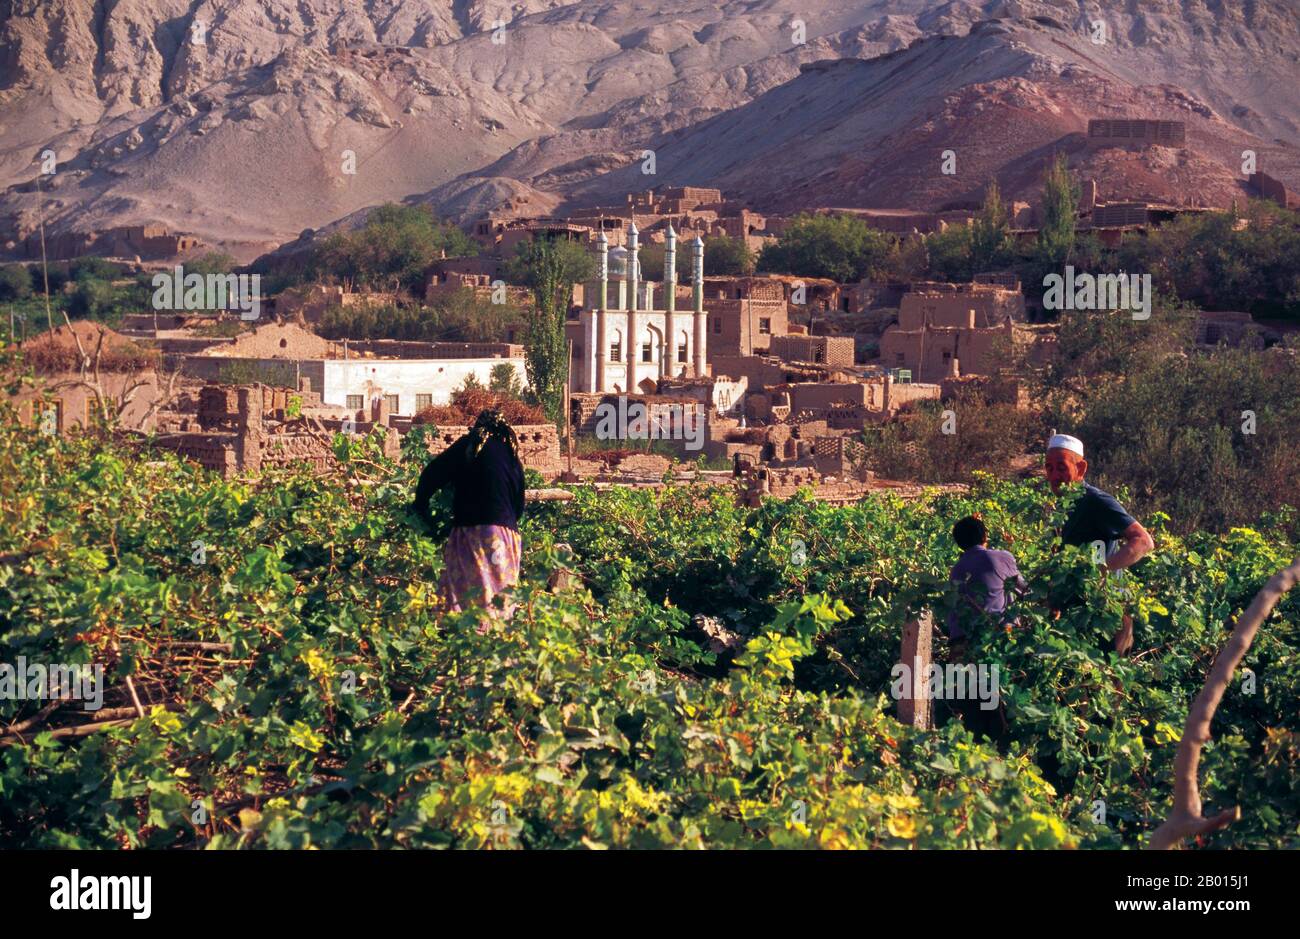 China: Uighur family working in a vineyard in the village of Tuyoq near Turfan, Xinjiang Province.  Tuyoq or Tuyugou is an ancient oasis-village in the Taklamakan desert, 70 km east of Turpan in a lush valley cutting into the Flaming Mountains, with a well preserved Uyghur orientation. It is famous for its seedless grapes and a number of ancient Buddhist meditation caves nearby containing frescos, the best known being the Bezeklik Thousand Buddha Caves. Stock Photo